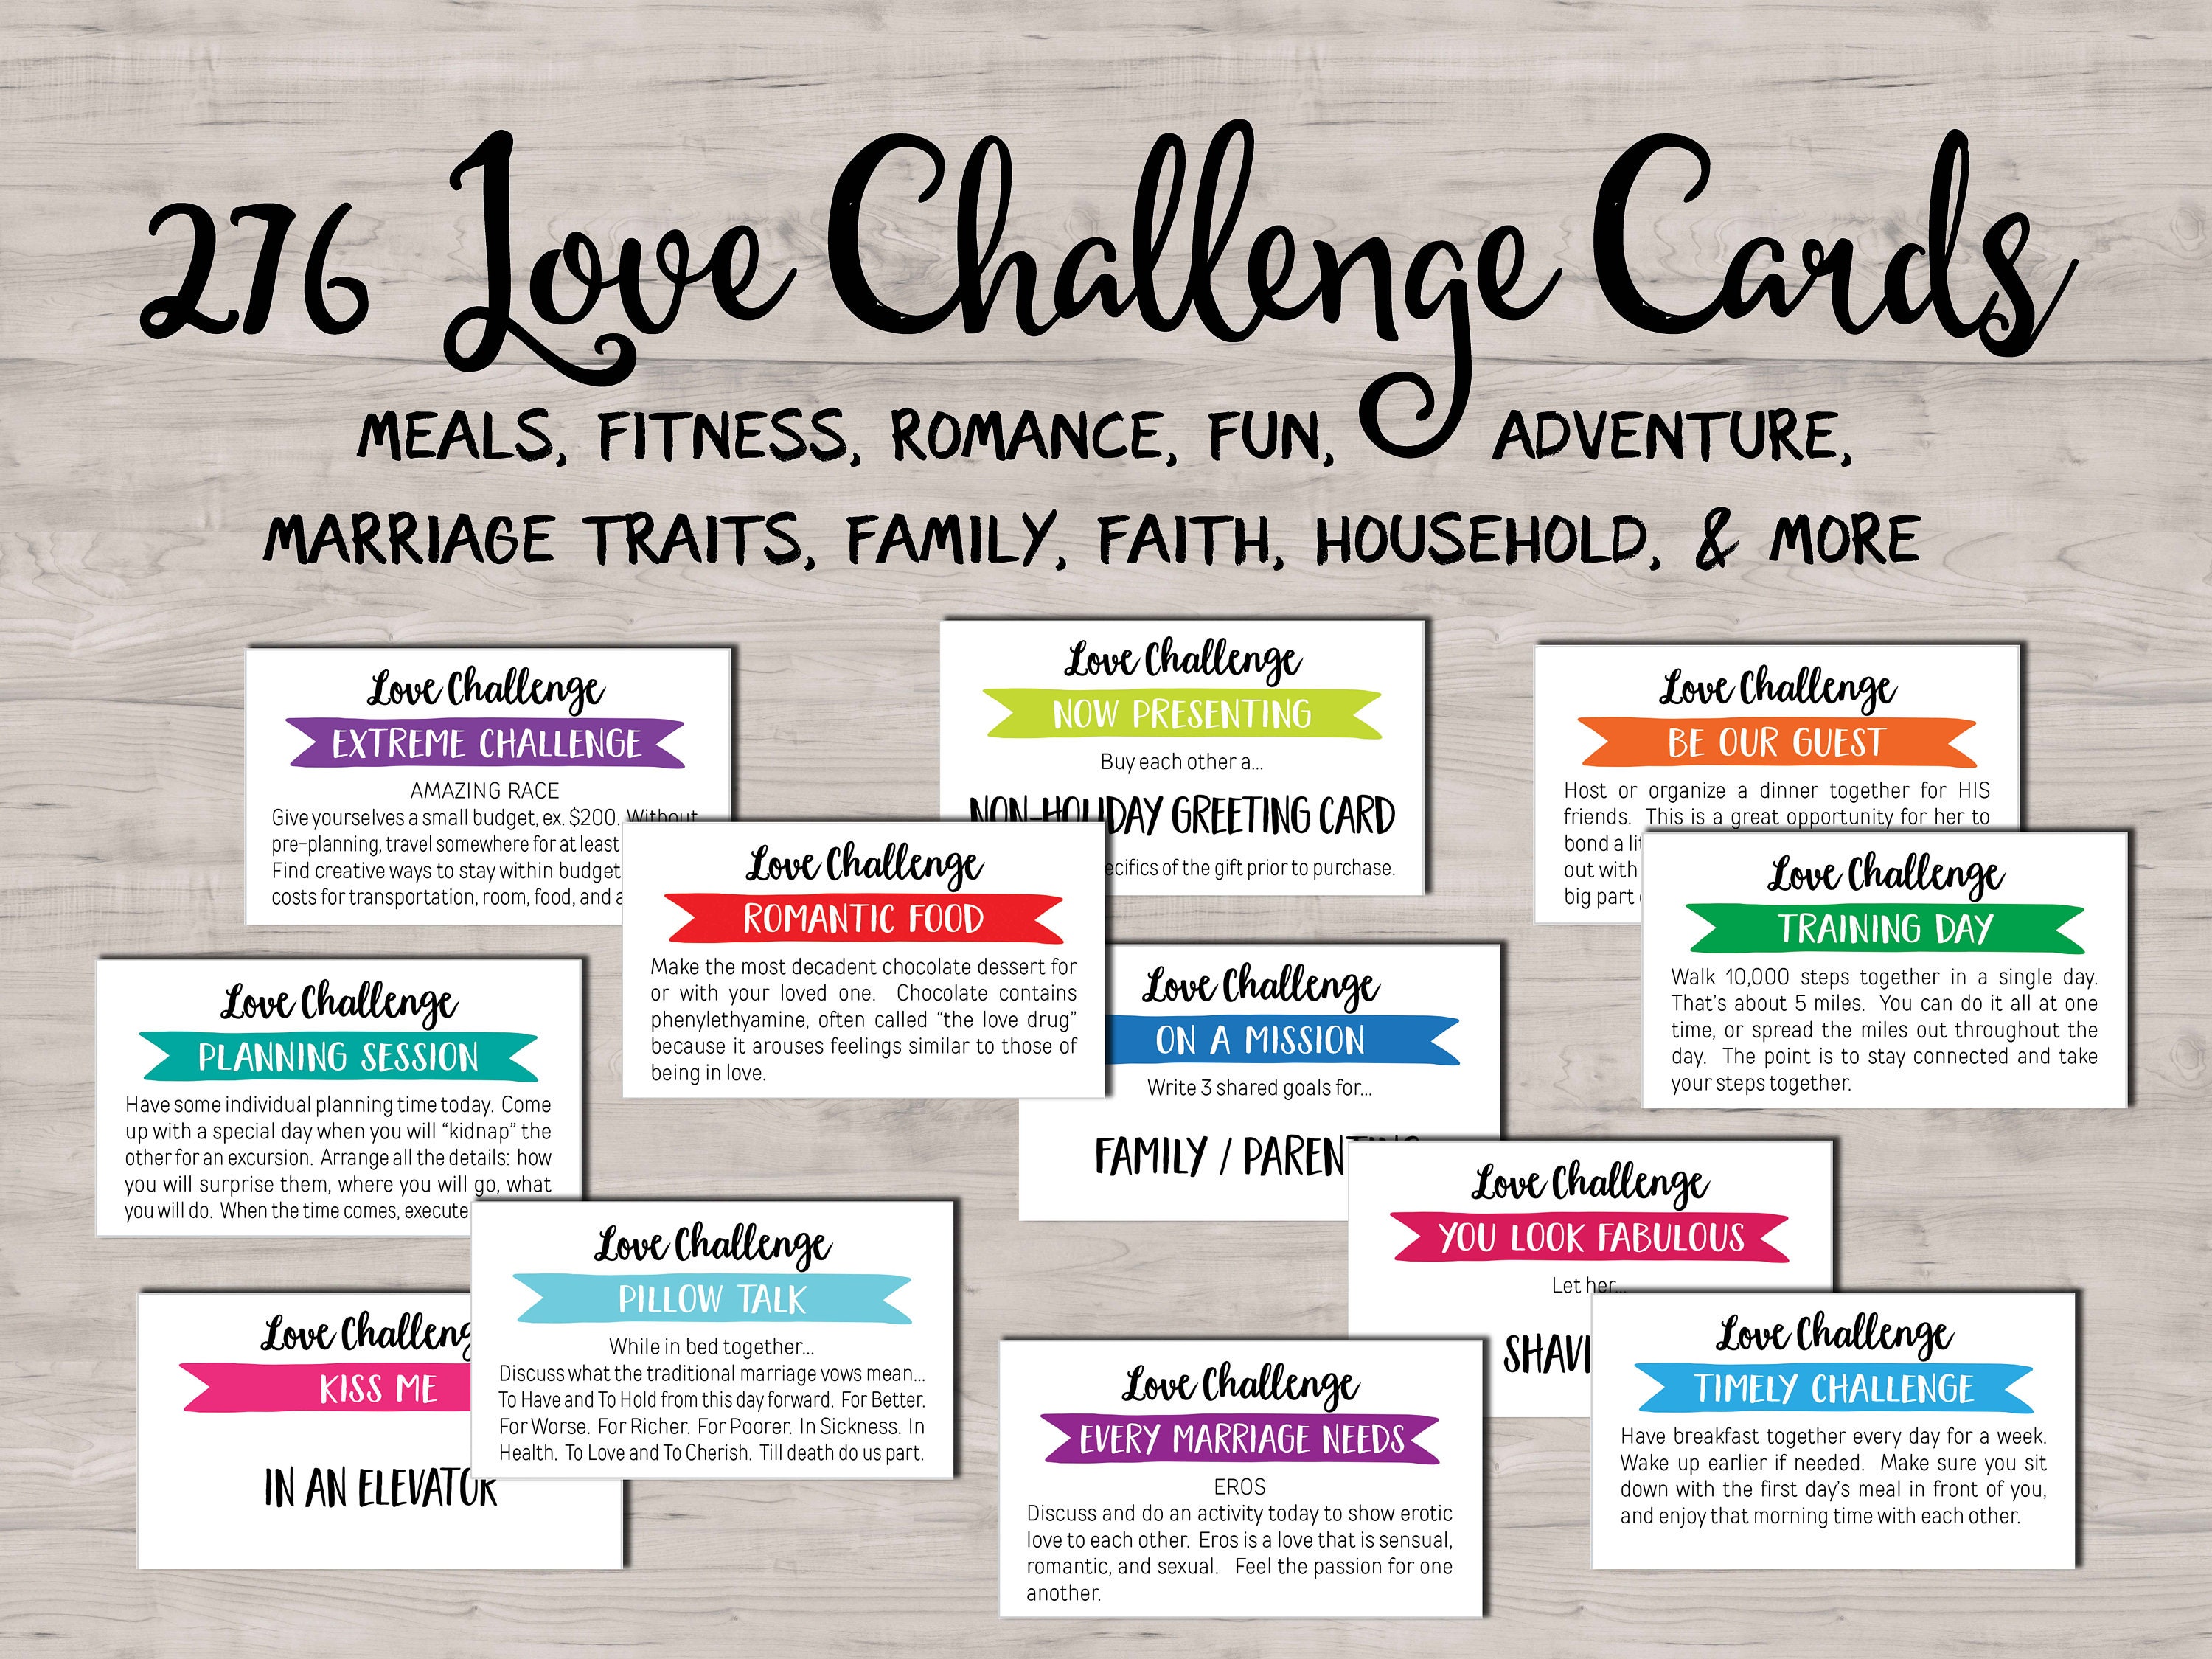 Love Challenge Cards. Instant Download Printable. Dating Wedding Marriage  Date Night Idea Jar. Valentine Love Dare Coupons Husband Wife Gift 